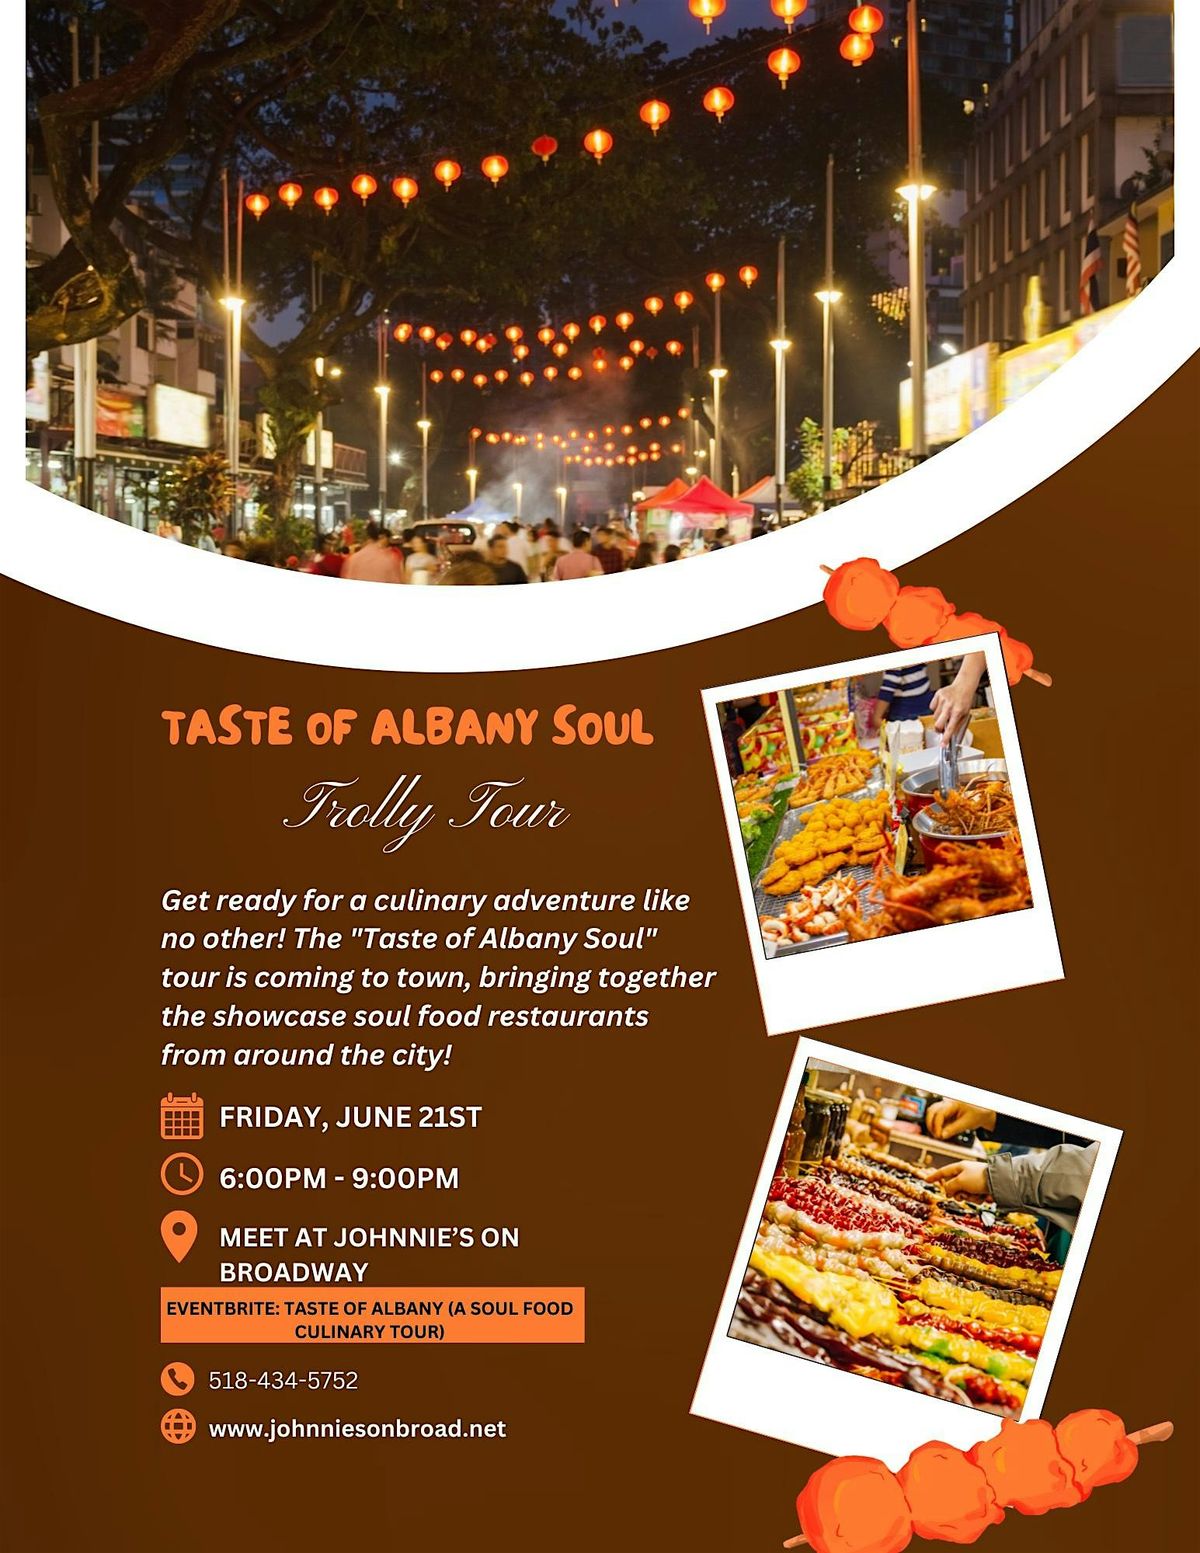 Taste of Albany (A Soul Food Culinary Tour)